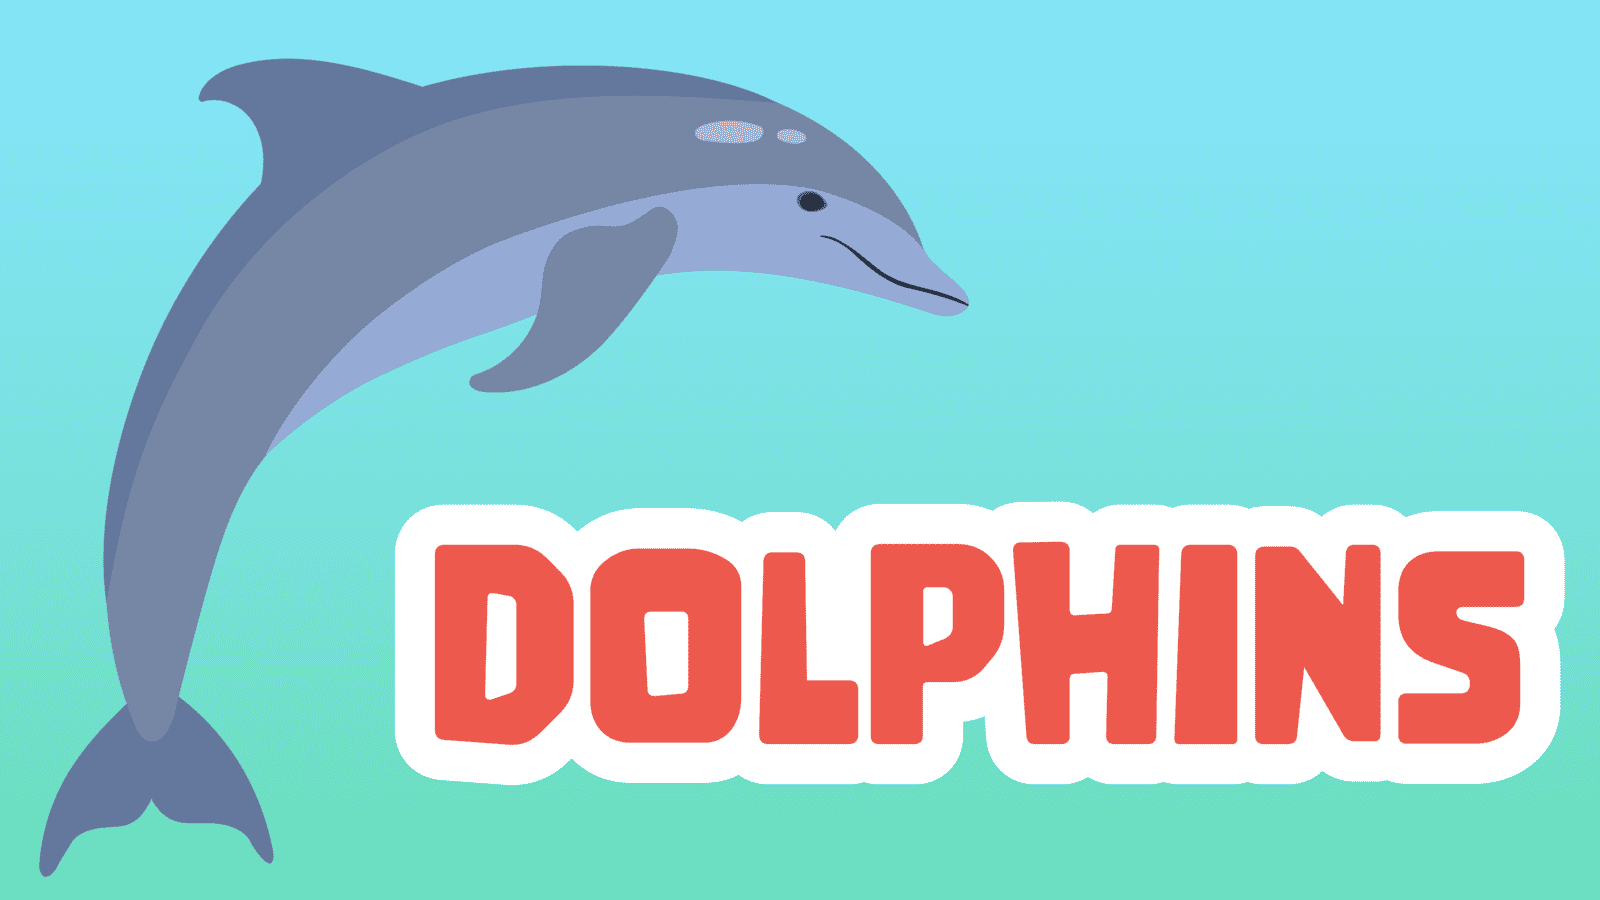 Dolphins Facts for Kids – 5 Dazzling Facts about Dolphins